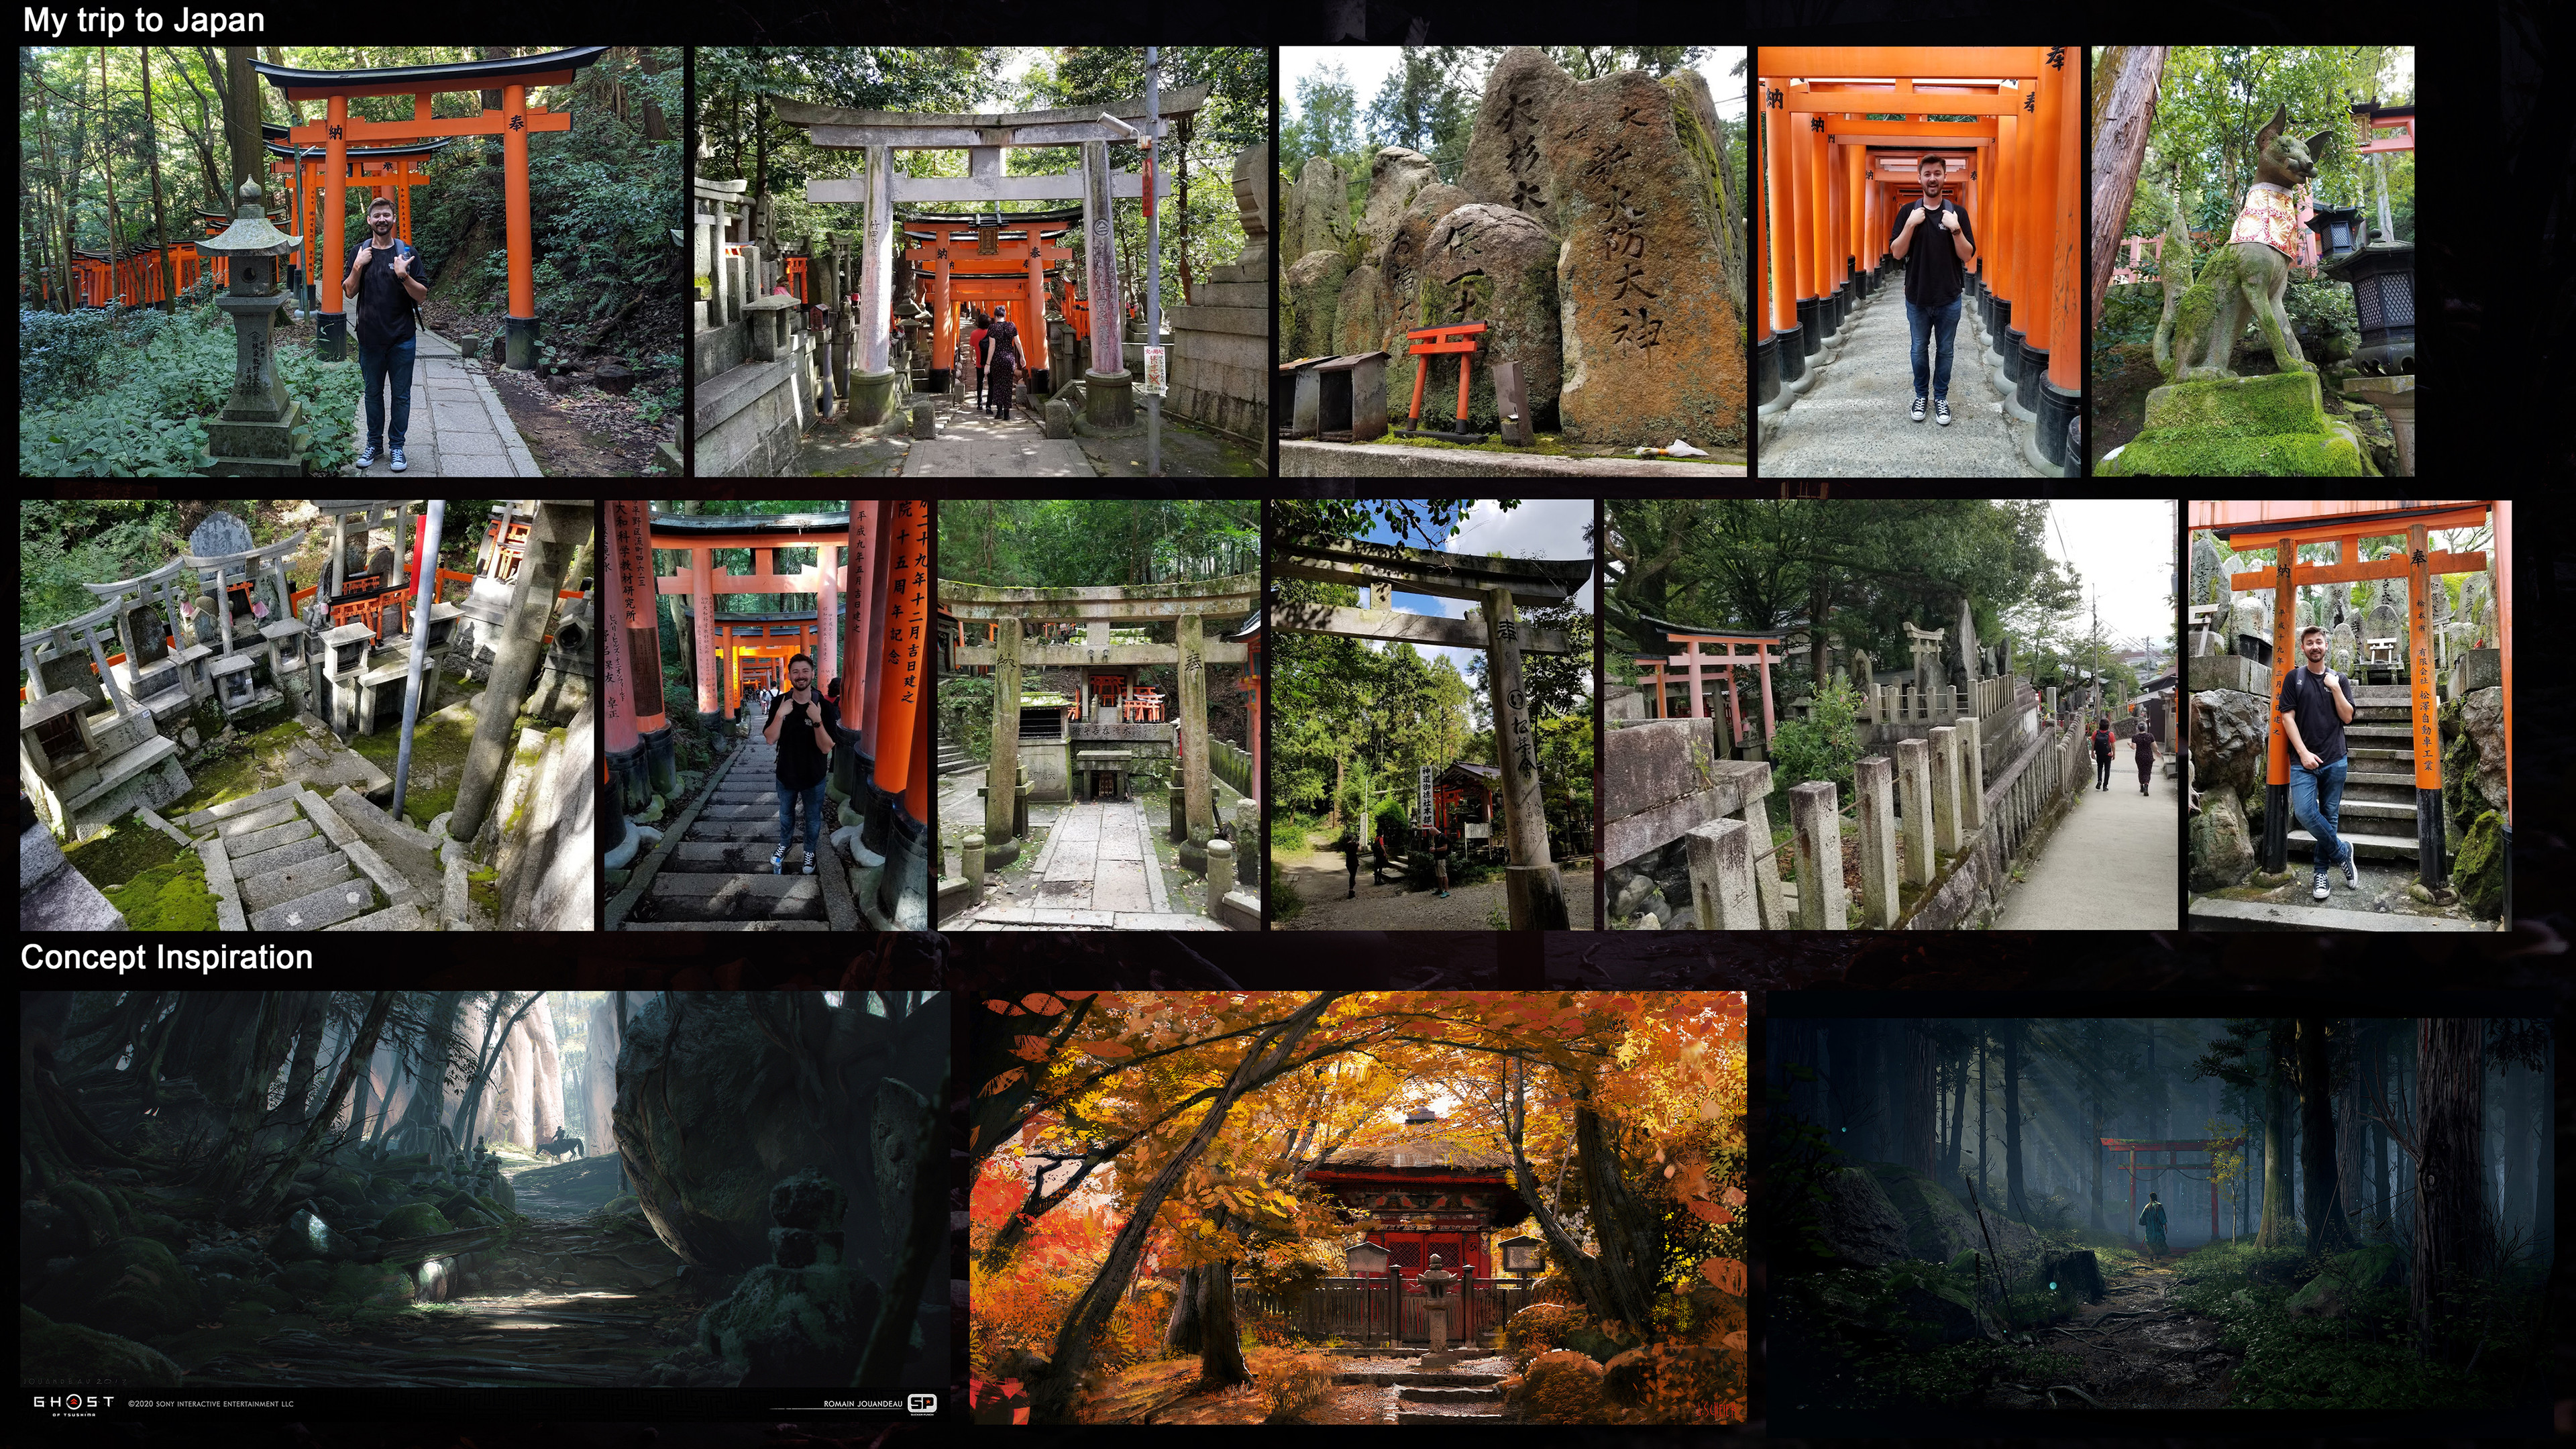 Personal reference from my trip to Japan and concept art inspiration